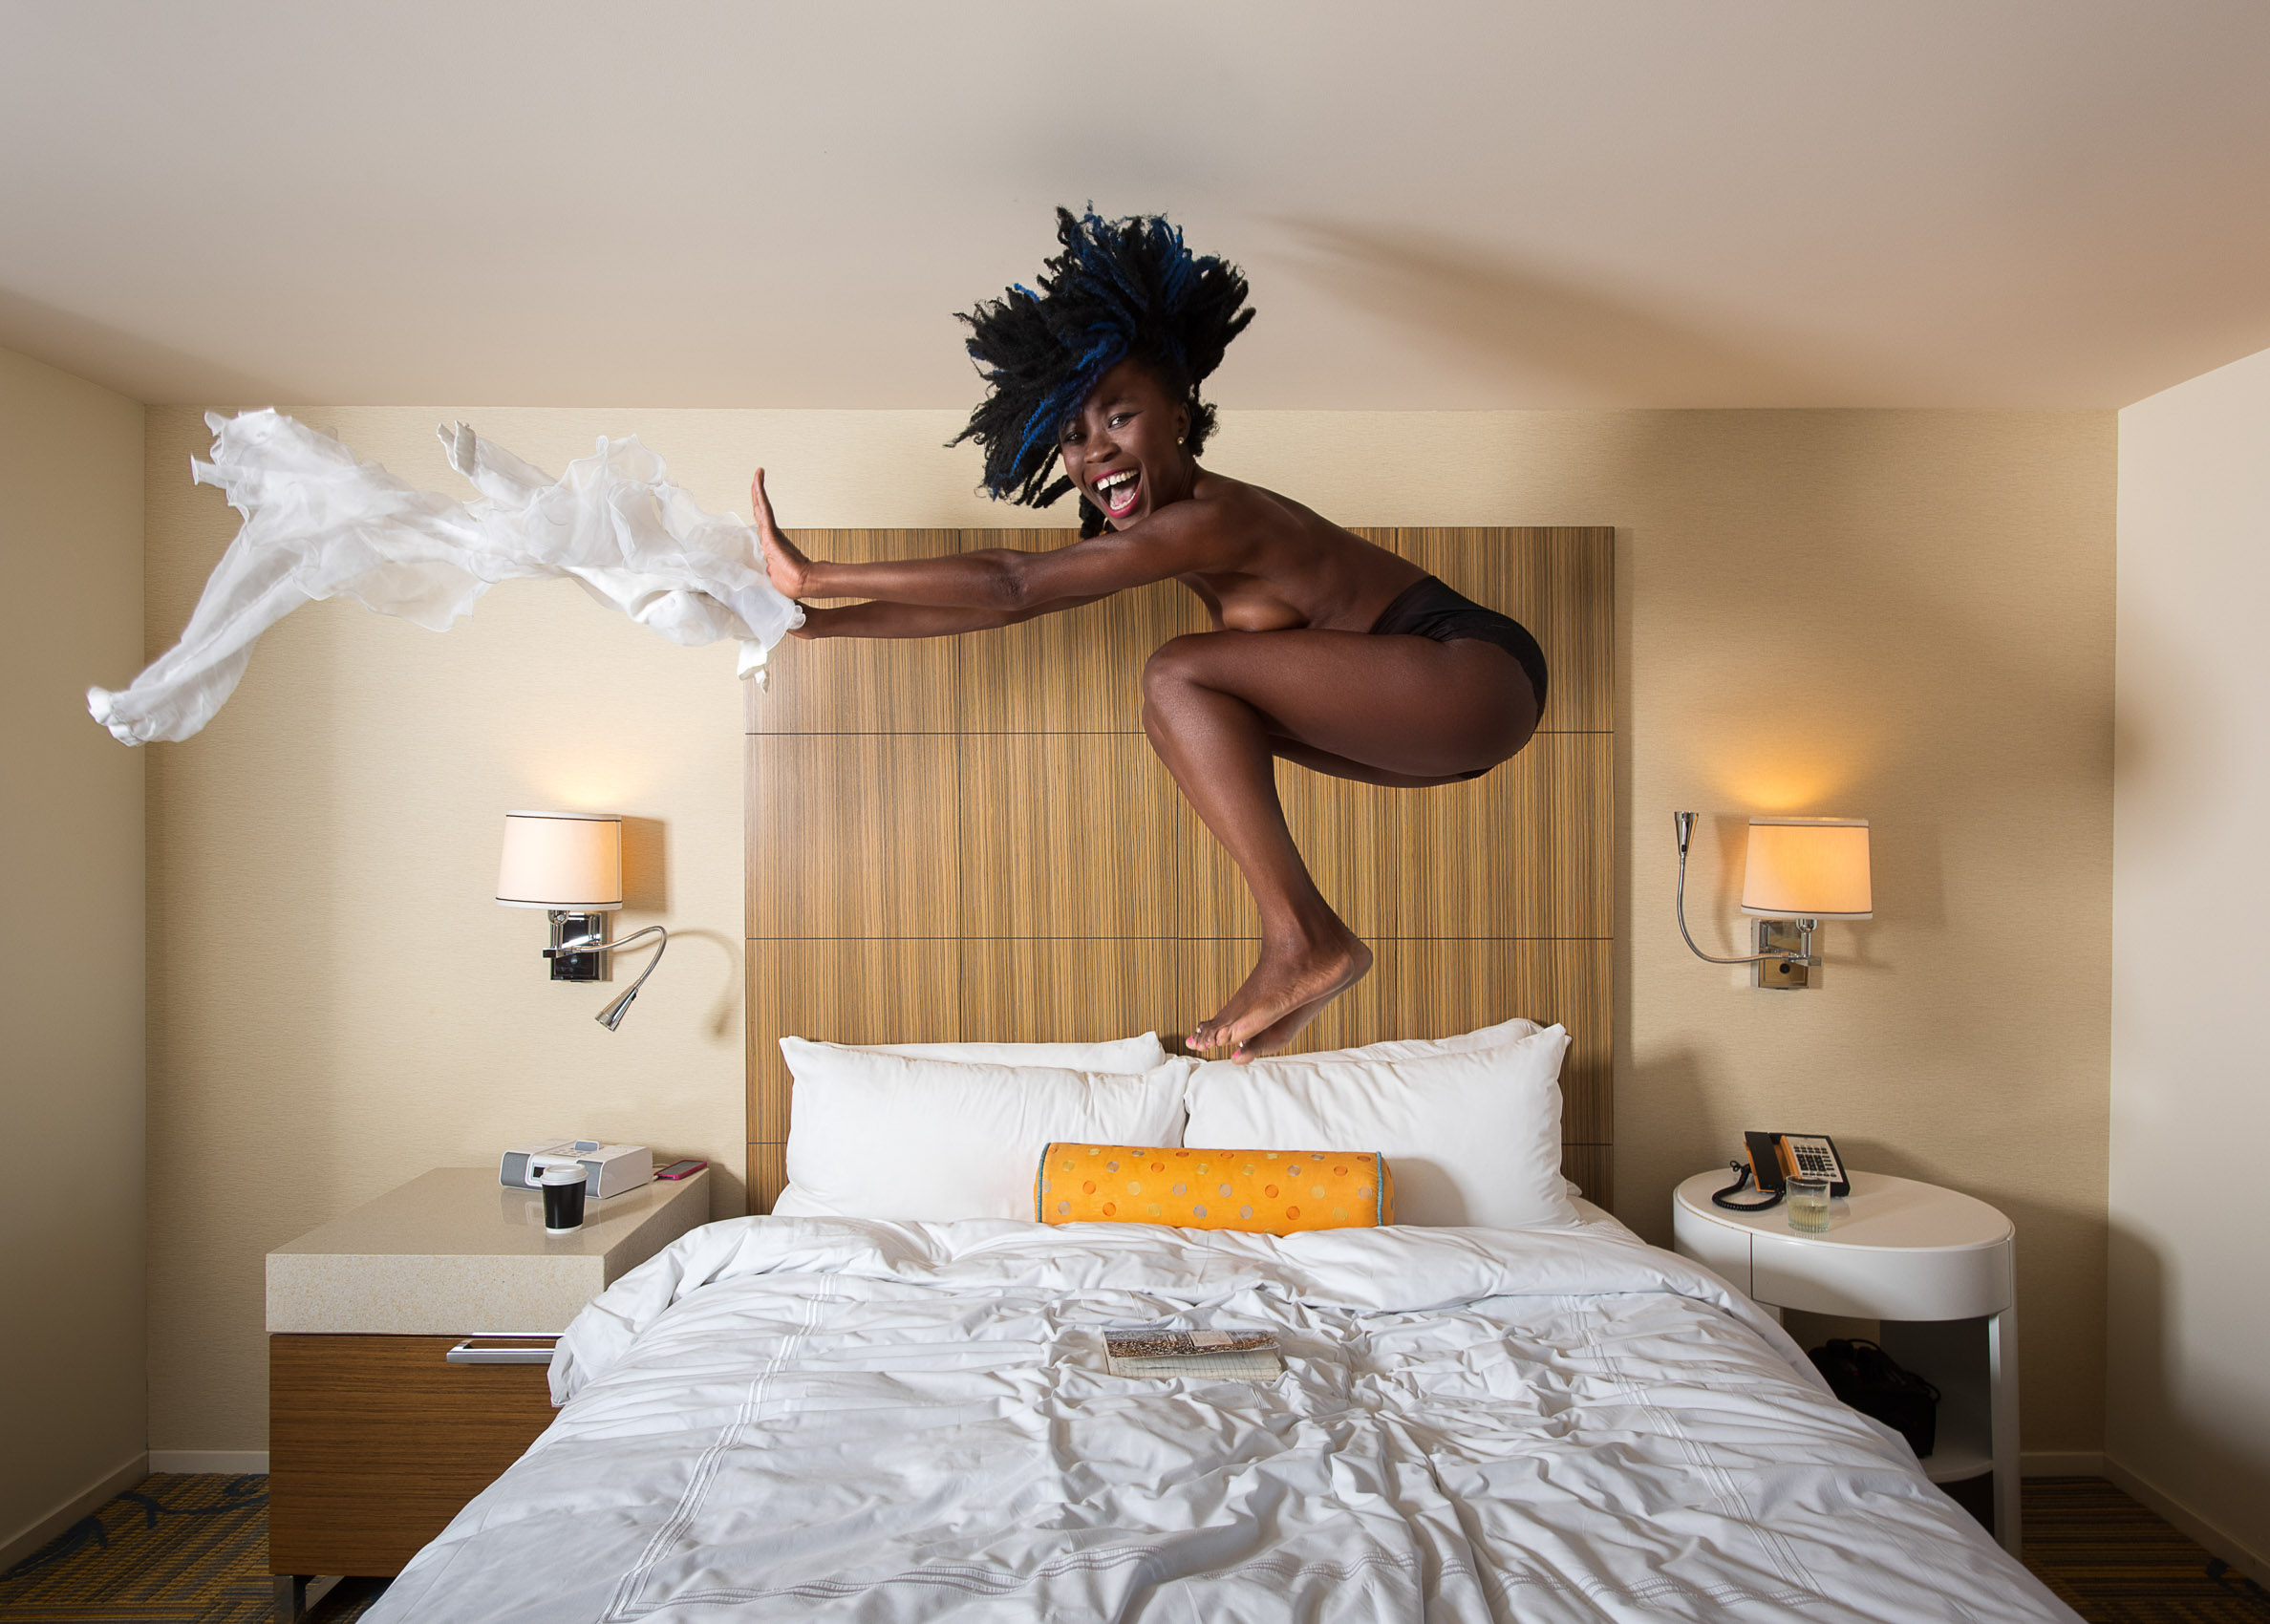 Los Angeles Portrait Photographer picture of a partially nude woman jumping on bed in Los Angeles.